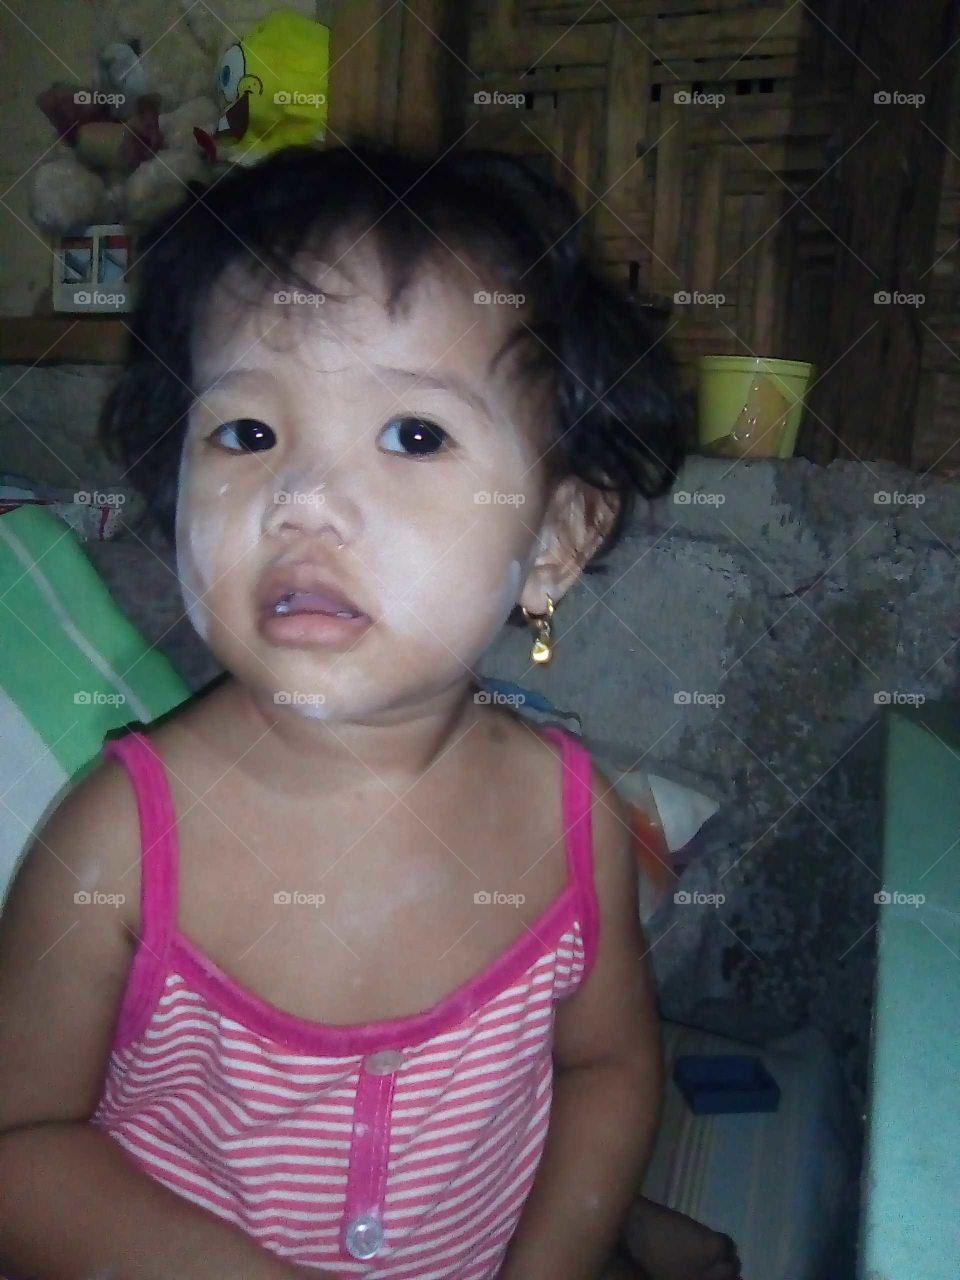 She played with the baby powder and this happened. She looked like a kid trying to imitate a character in a horror movie.